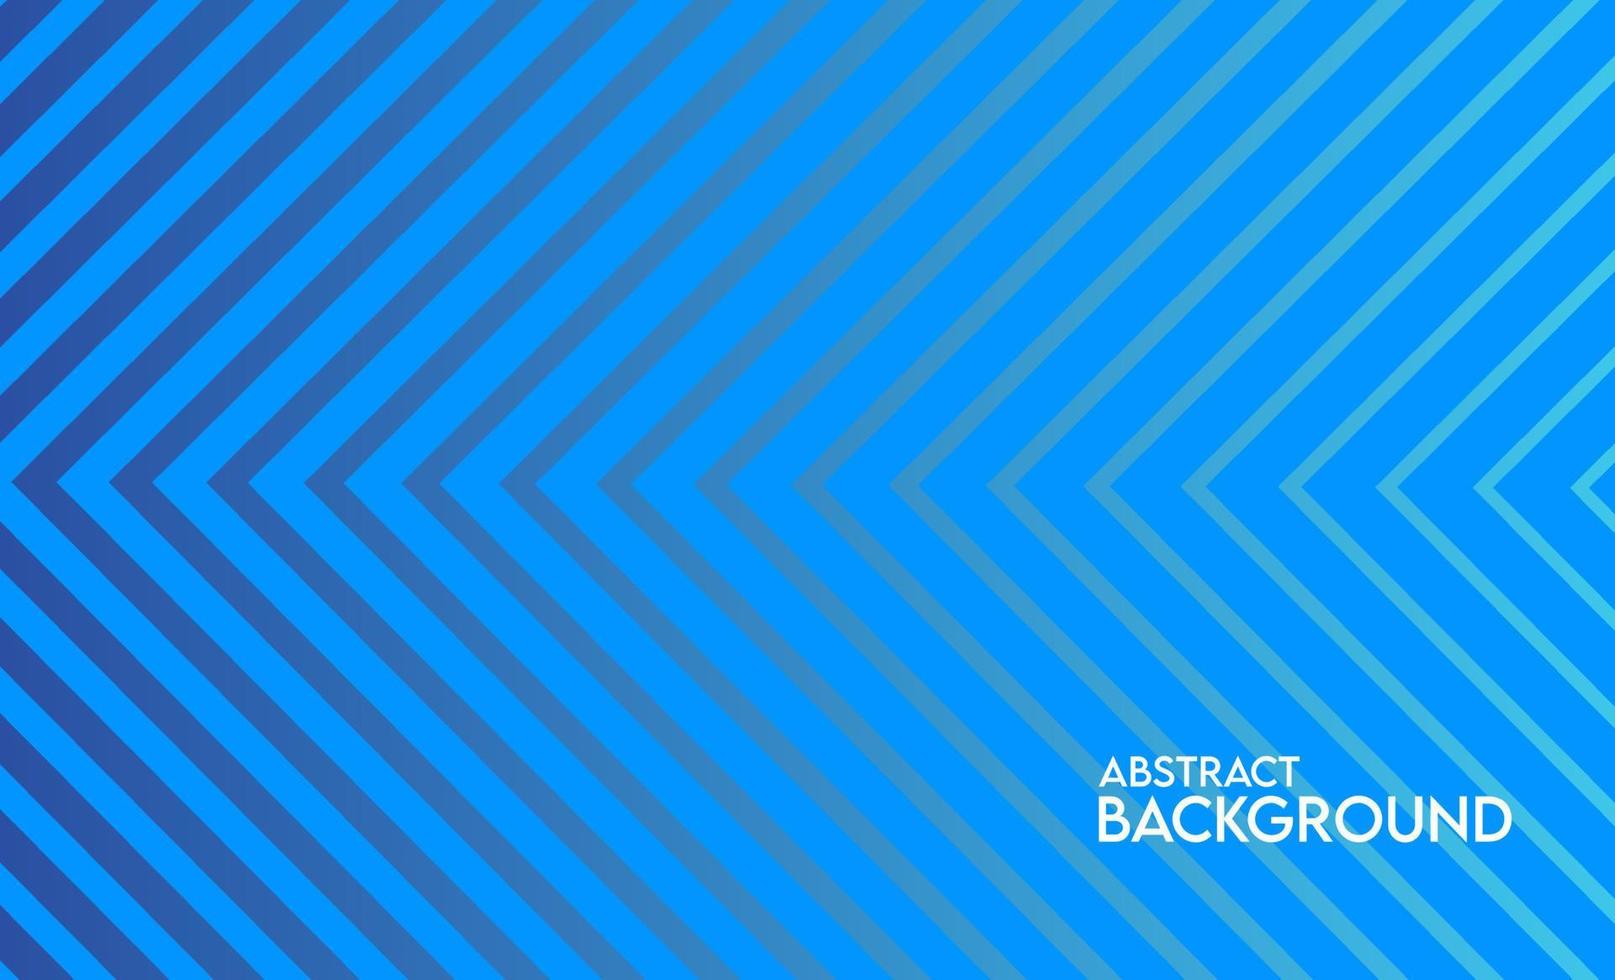 abstract background blue color with stripes vector